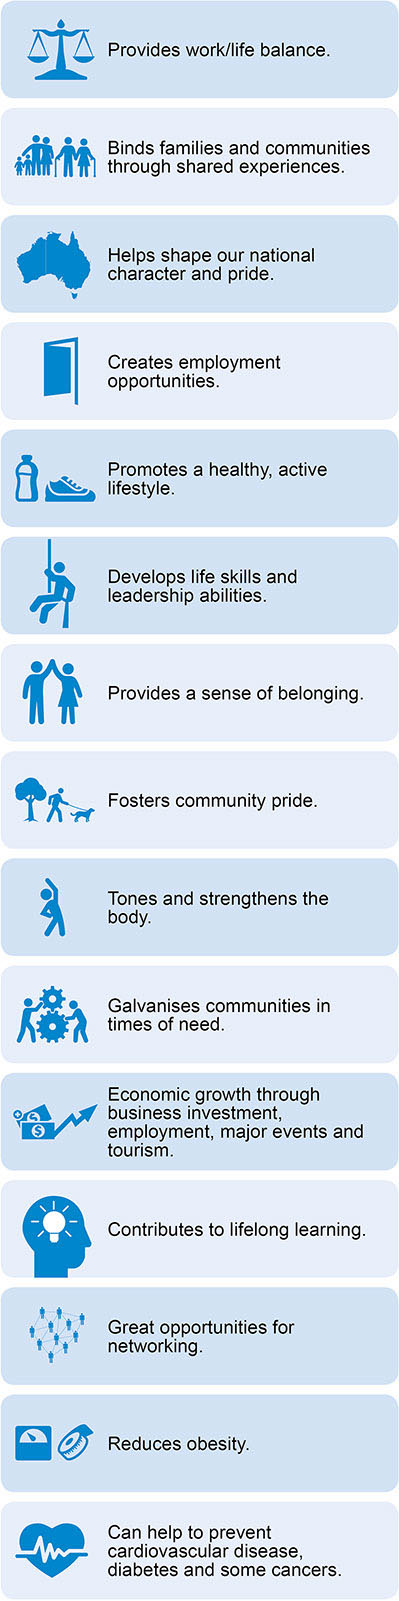 What are the roles of a family in helping build a safe and healthy community